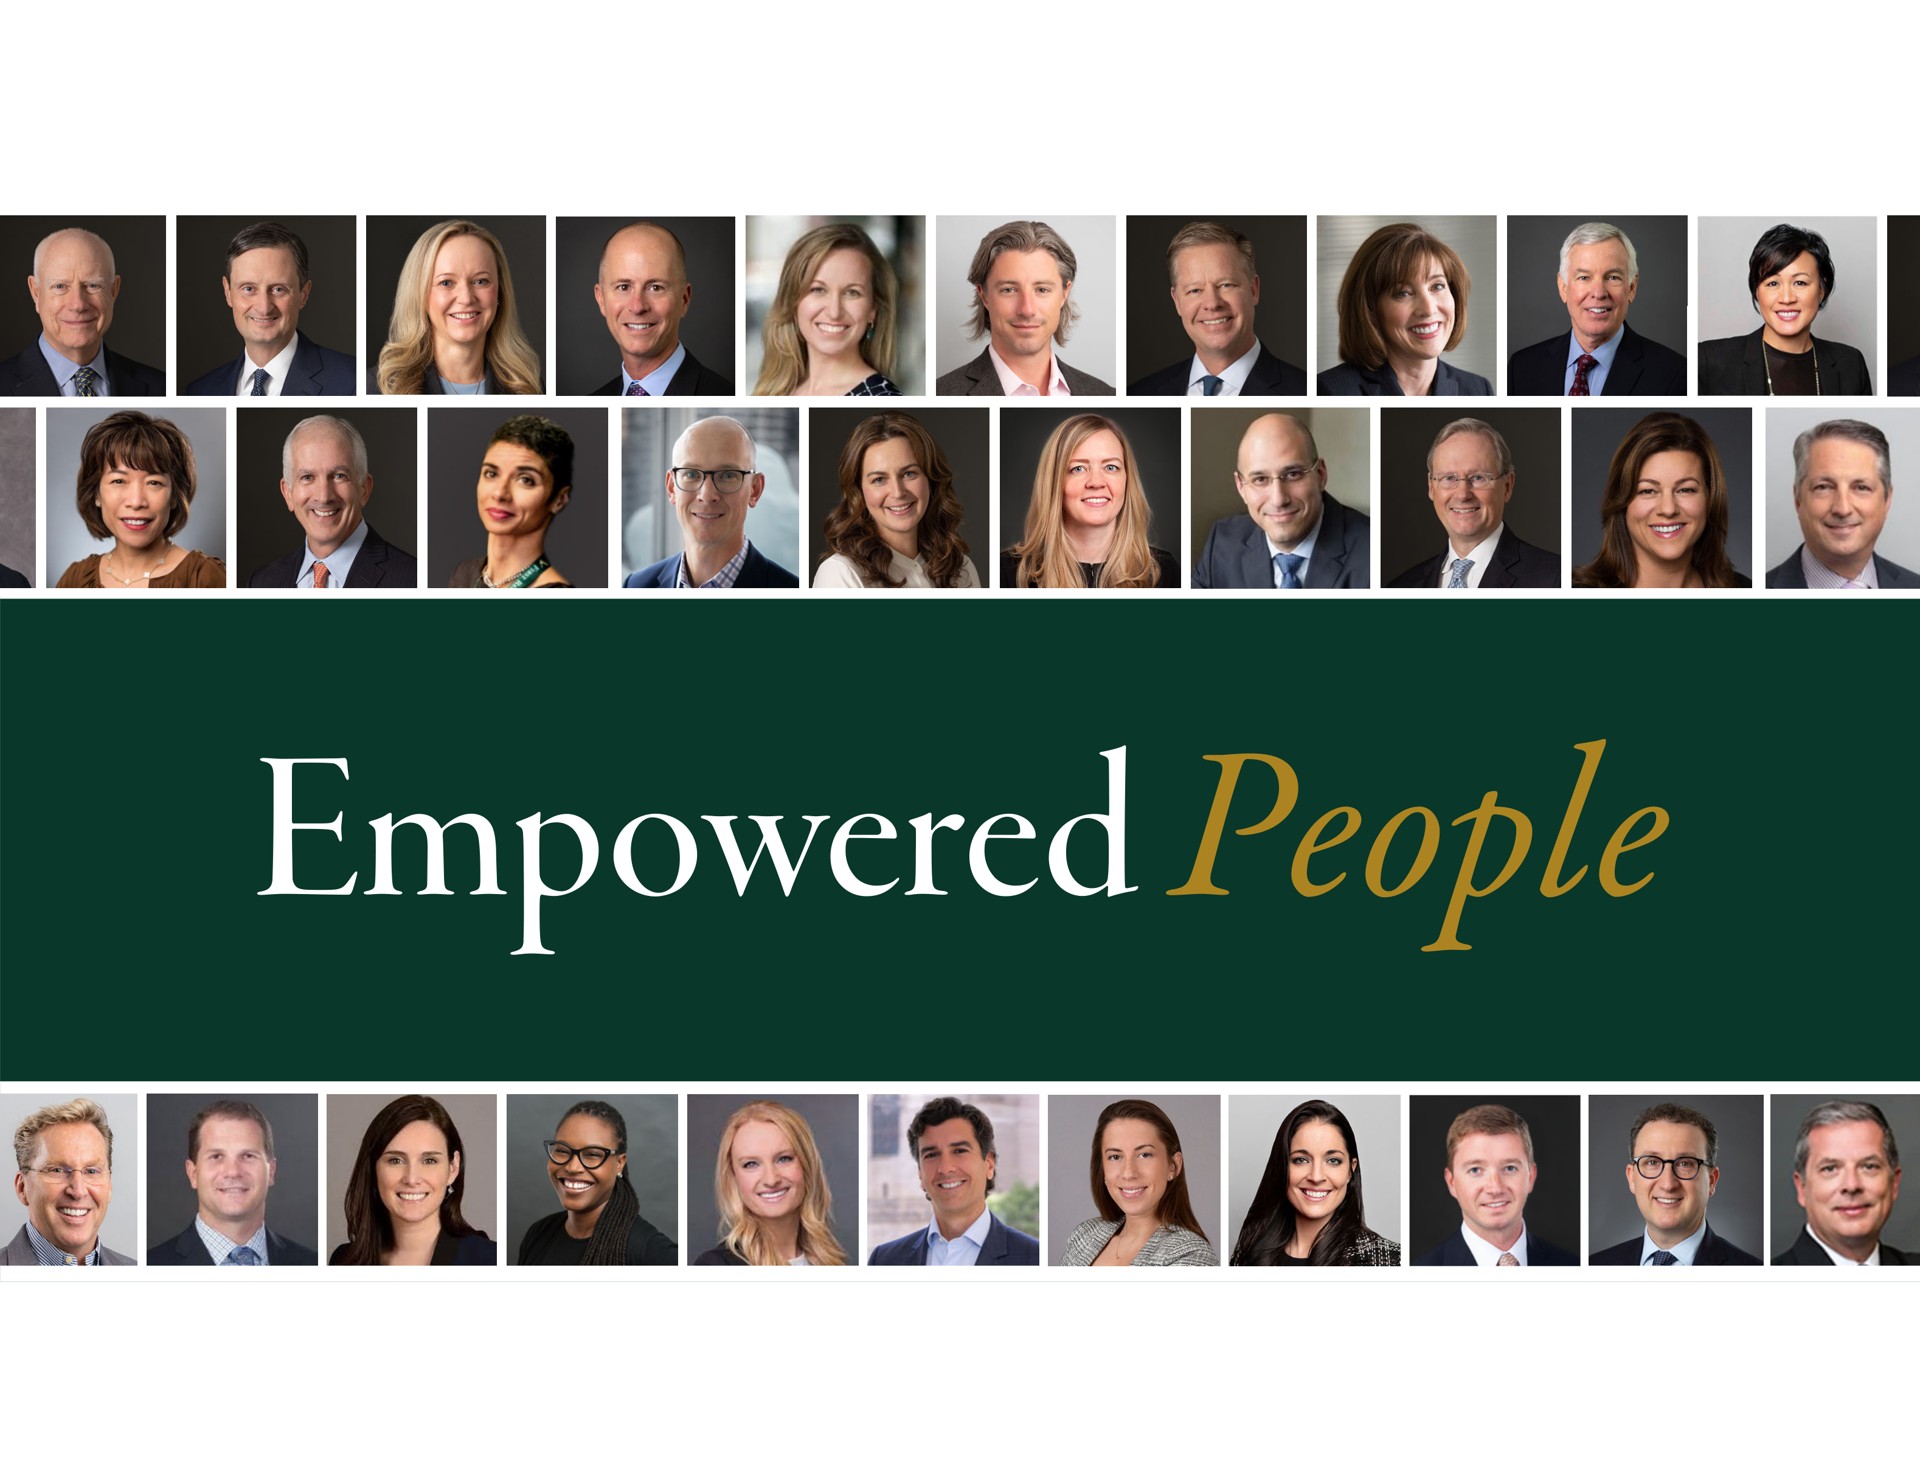 empowered people | First Republic Bank